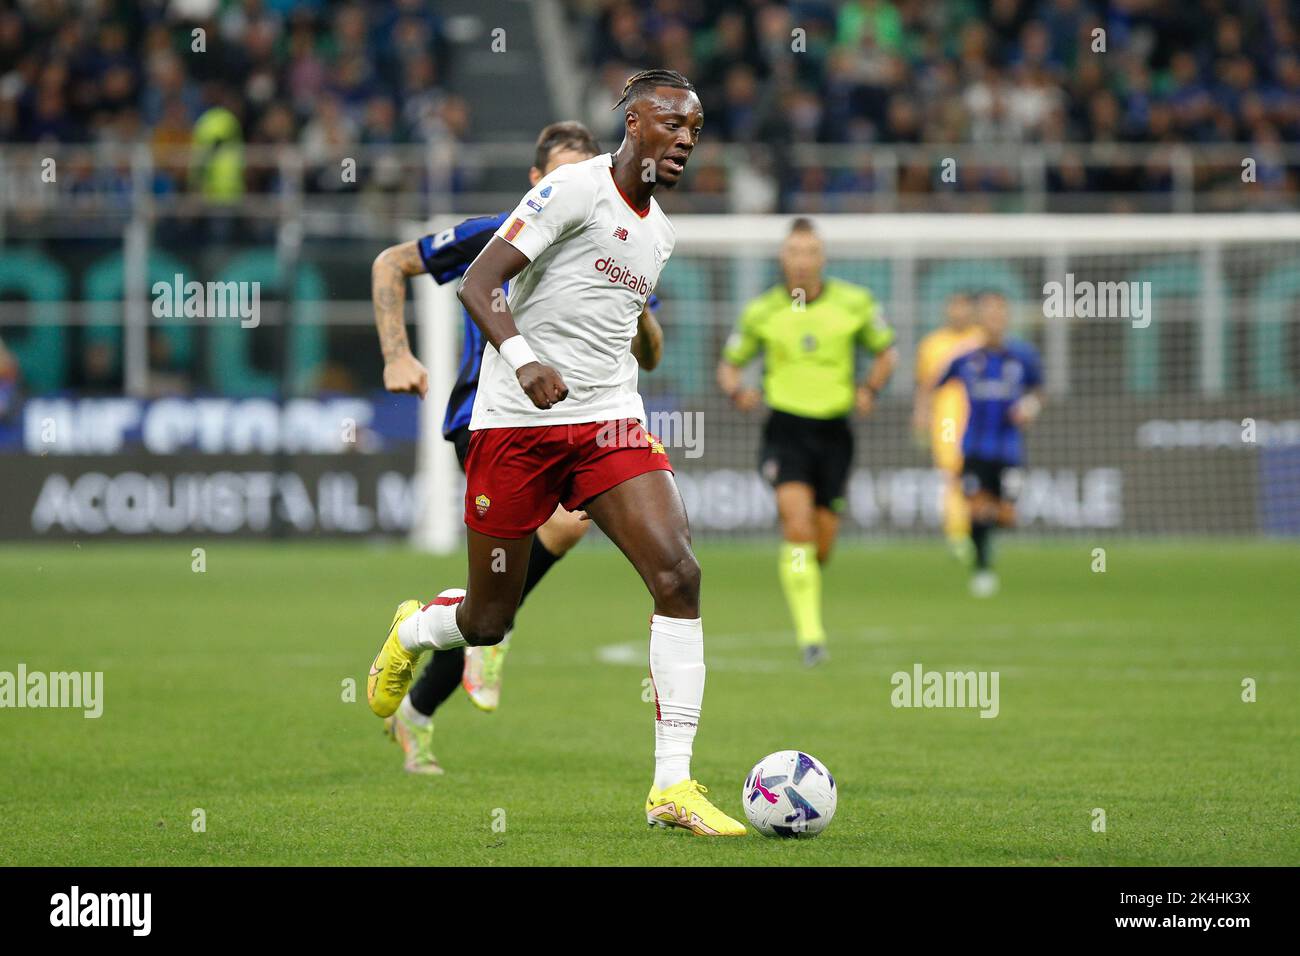 Milan, Italy. 01st Oct, 2022. Italy, Milan, oct 1 2022: Tammy Abraham (Roma striker) attacks the penalty area in the second half during soccer game FC INTER vs AS ROMA, Serie A Tim 2022-2023 day8 San Siro stadium (Photo by Fabrizio Andrea Bertani/Pacific Press) Credit: Pacific Press Media Production Corp./Alamy Live News Stock Photo